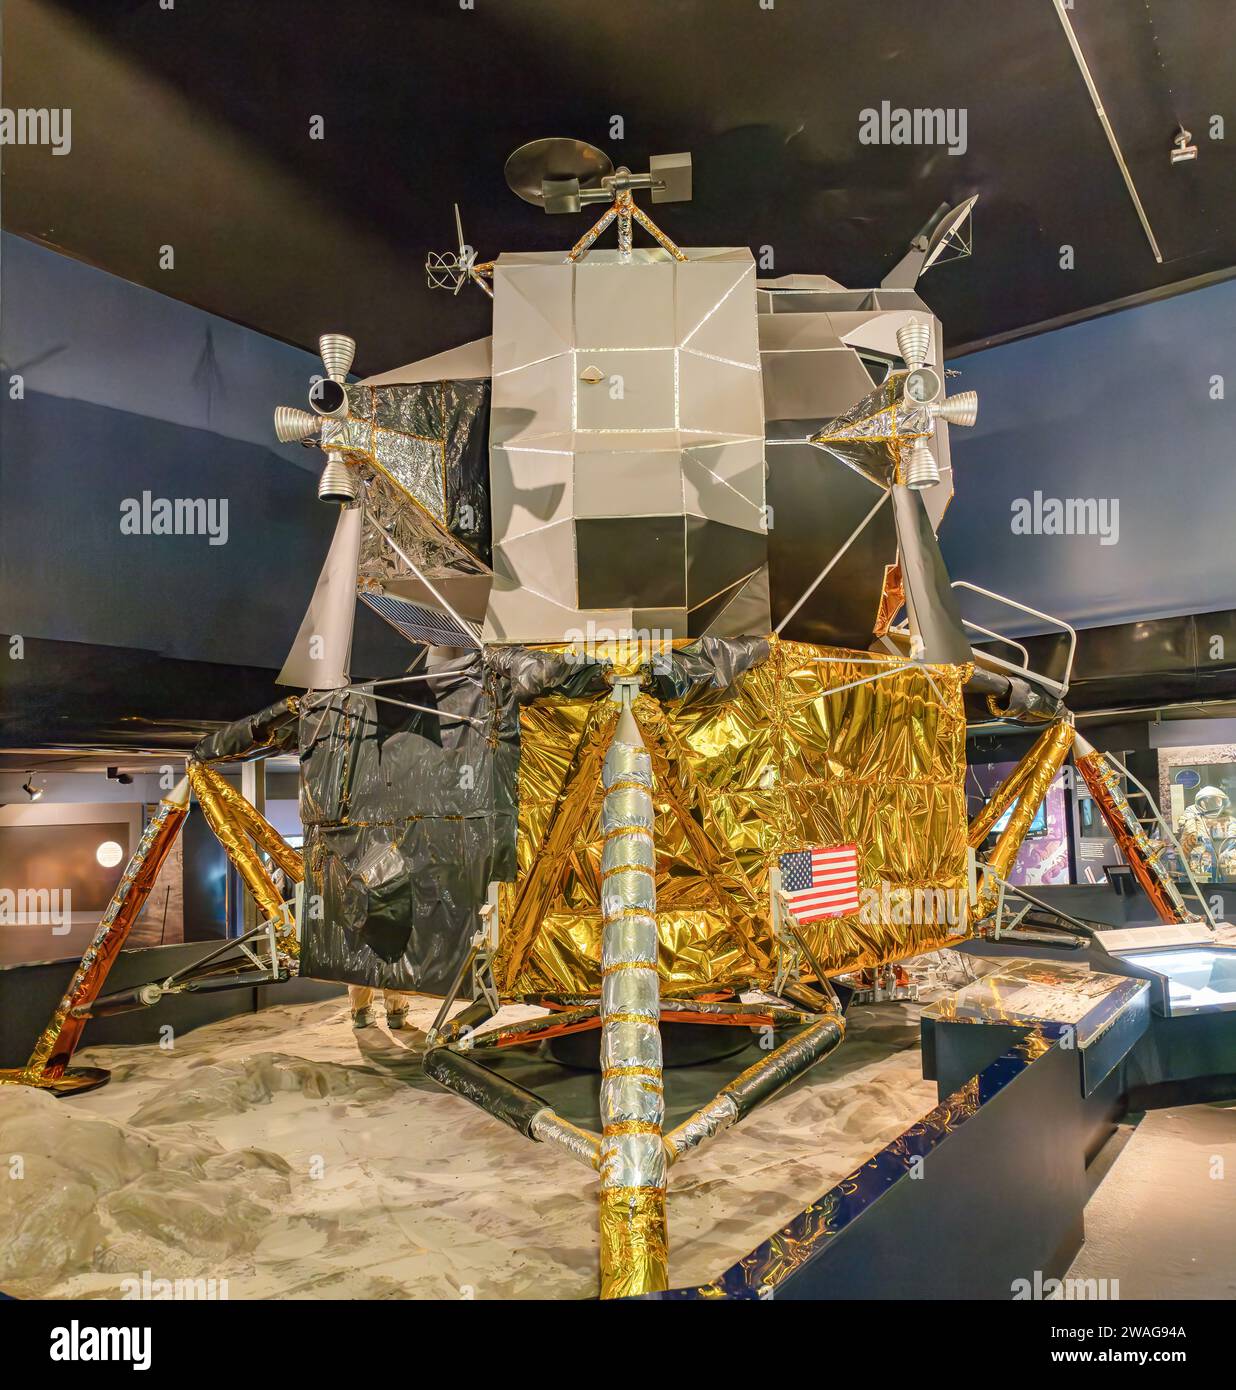 London, UK - May 19, 2023: Lunar Module Eagle LM-5, the spacecraft that served as the crewed lunar lander of Apollo 11, which was the first mission to Stock Photo